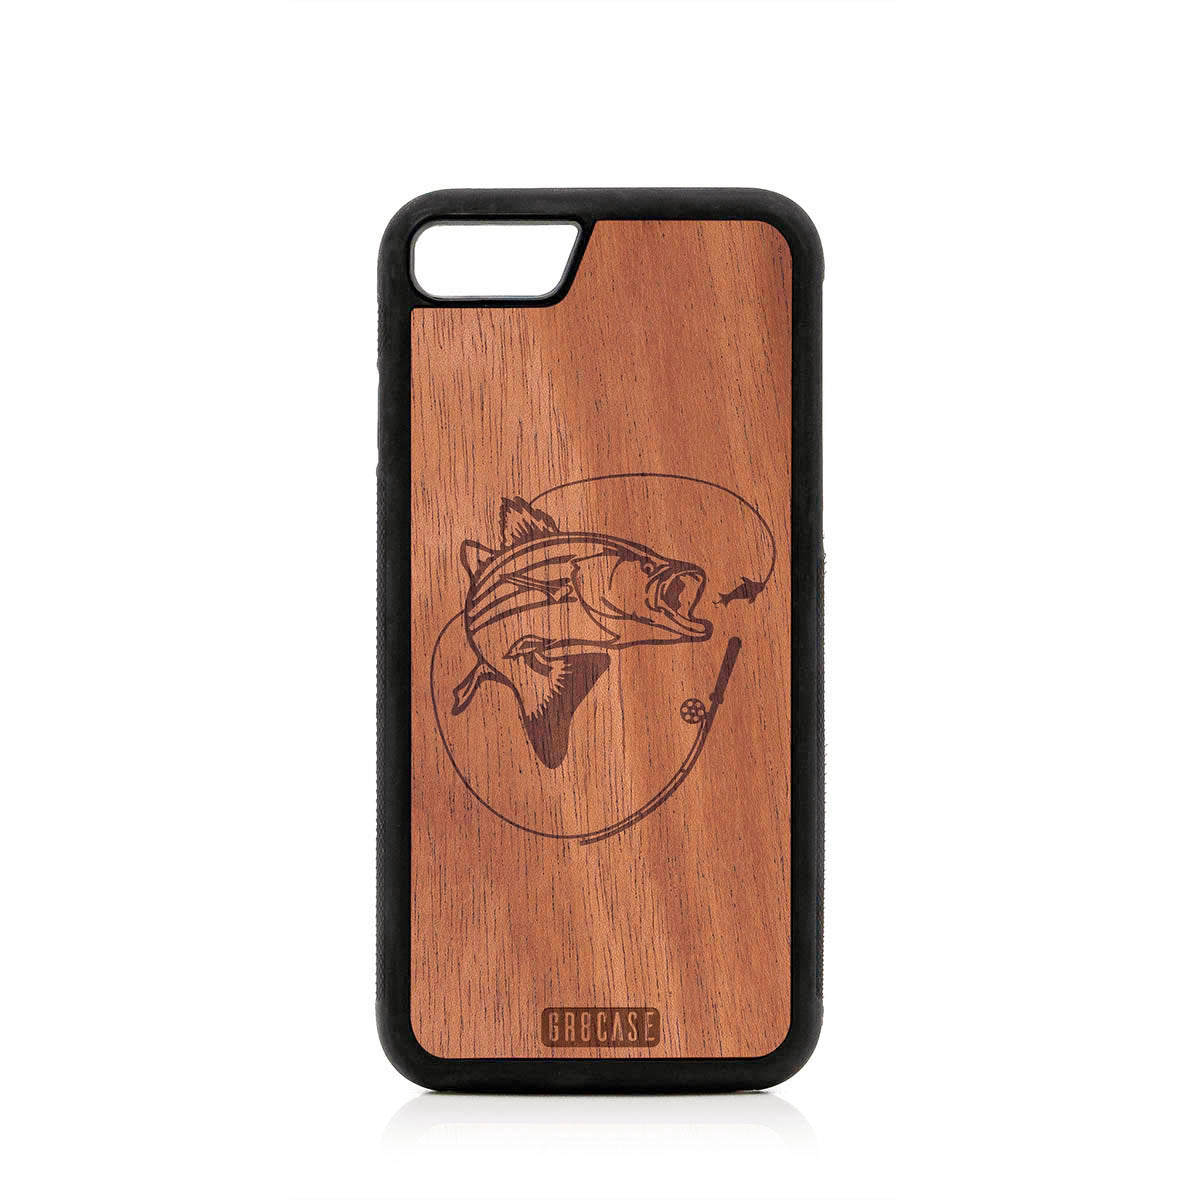 Fish and Reel Design Wood Case For iPhone 7/8 by GR8CASE